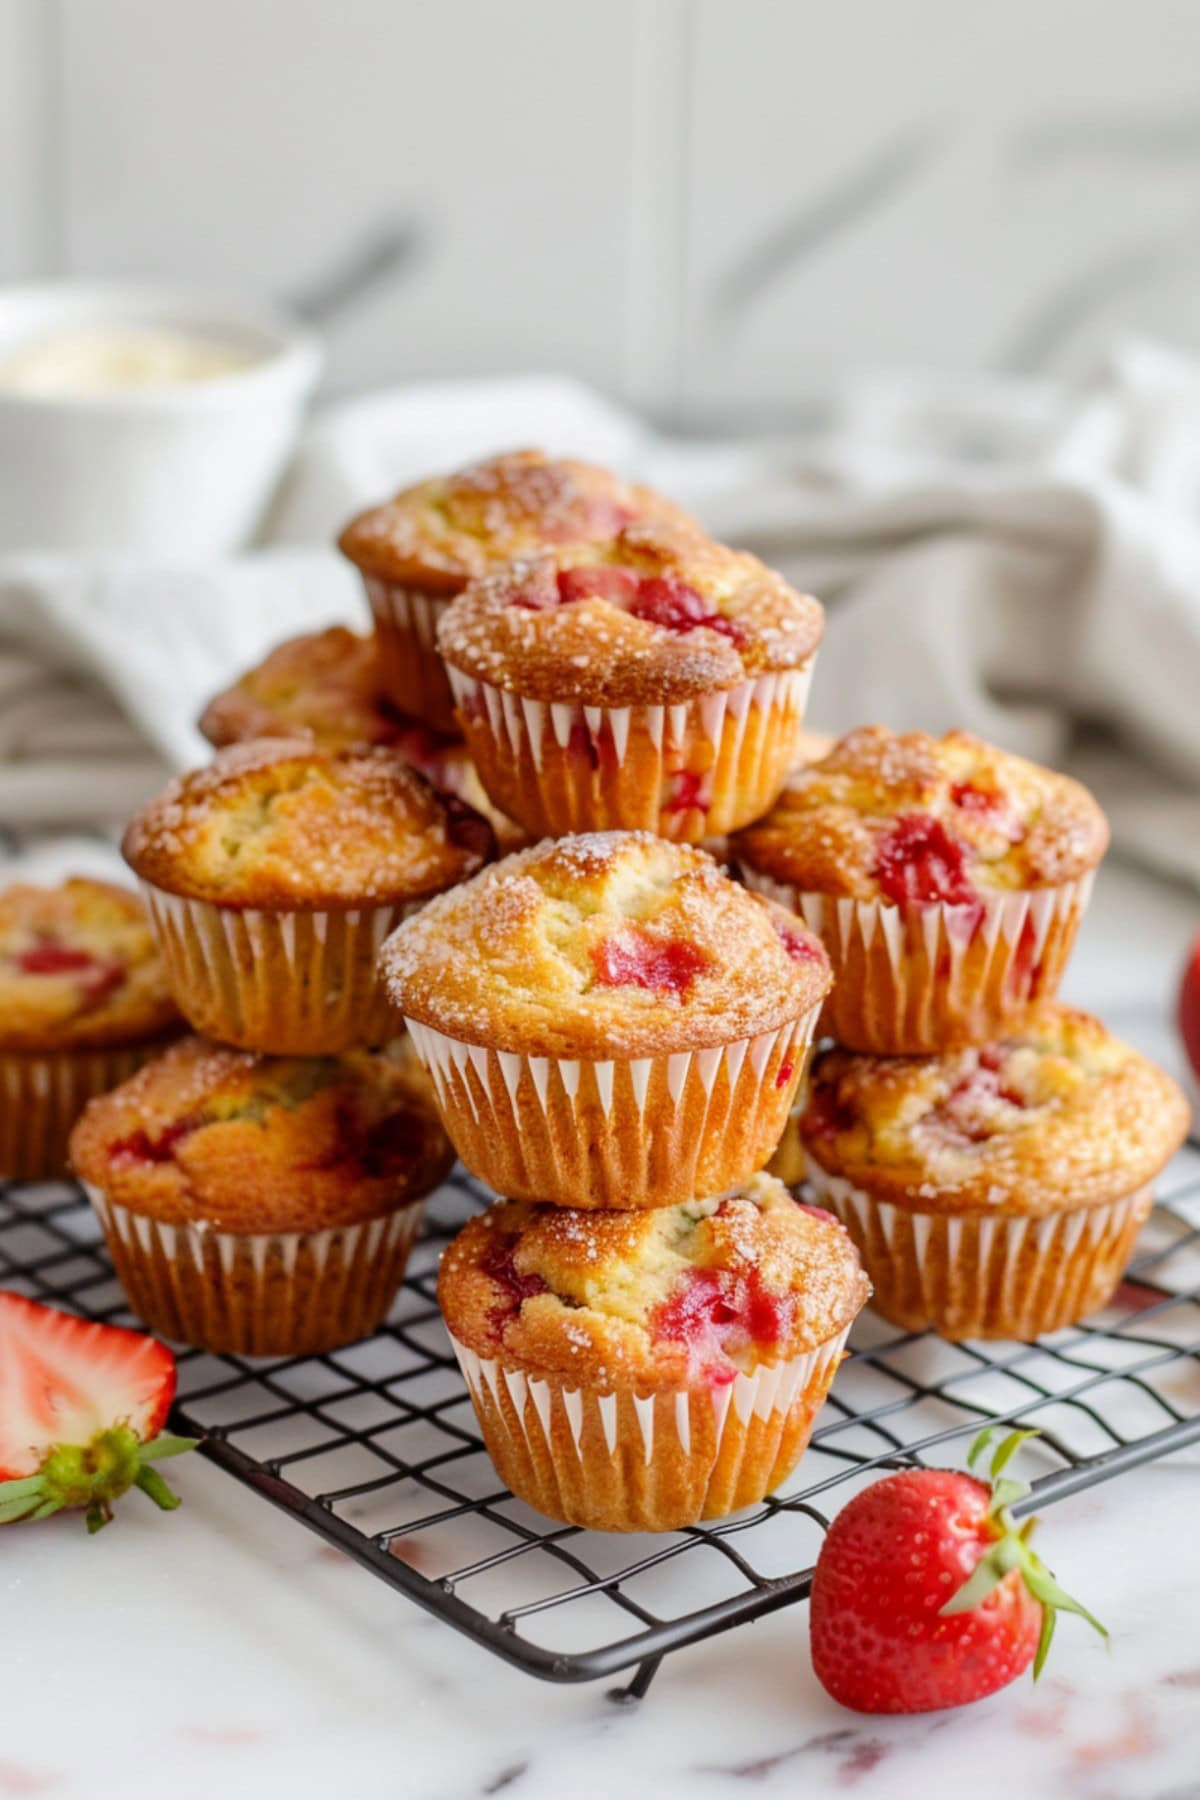 Warm and golden strawberry muffins in a cooling rack fresh from the oven